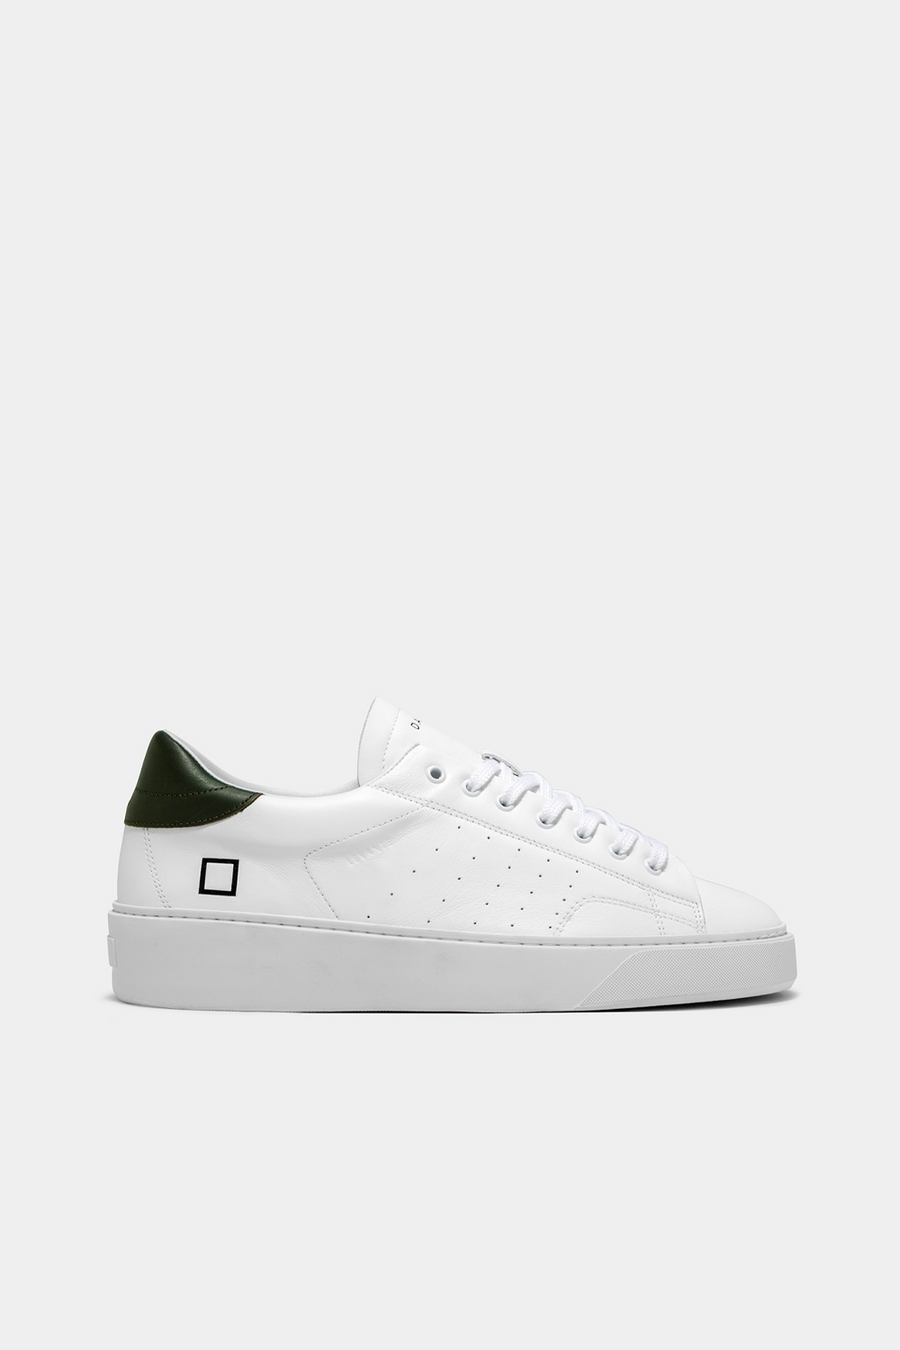 Buy the D.A.T.E. Levante Calf Sneaker in White/Green at Intro. Spend £50 for free UK delivery. Official stockists. We ship worldwide.